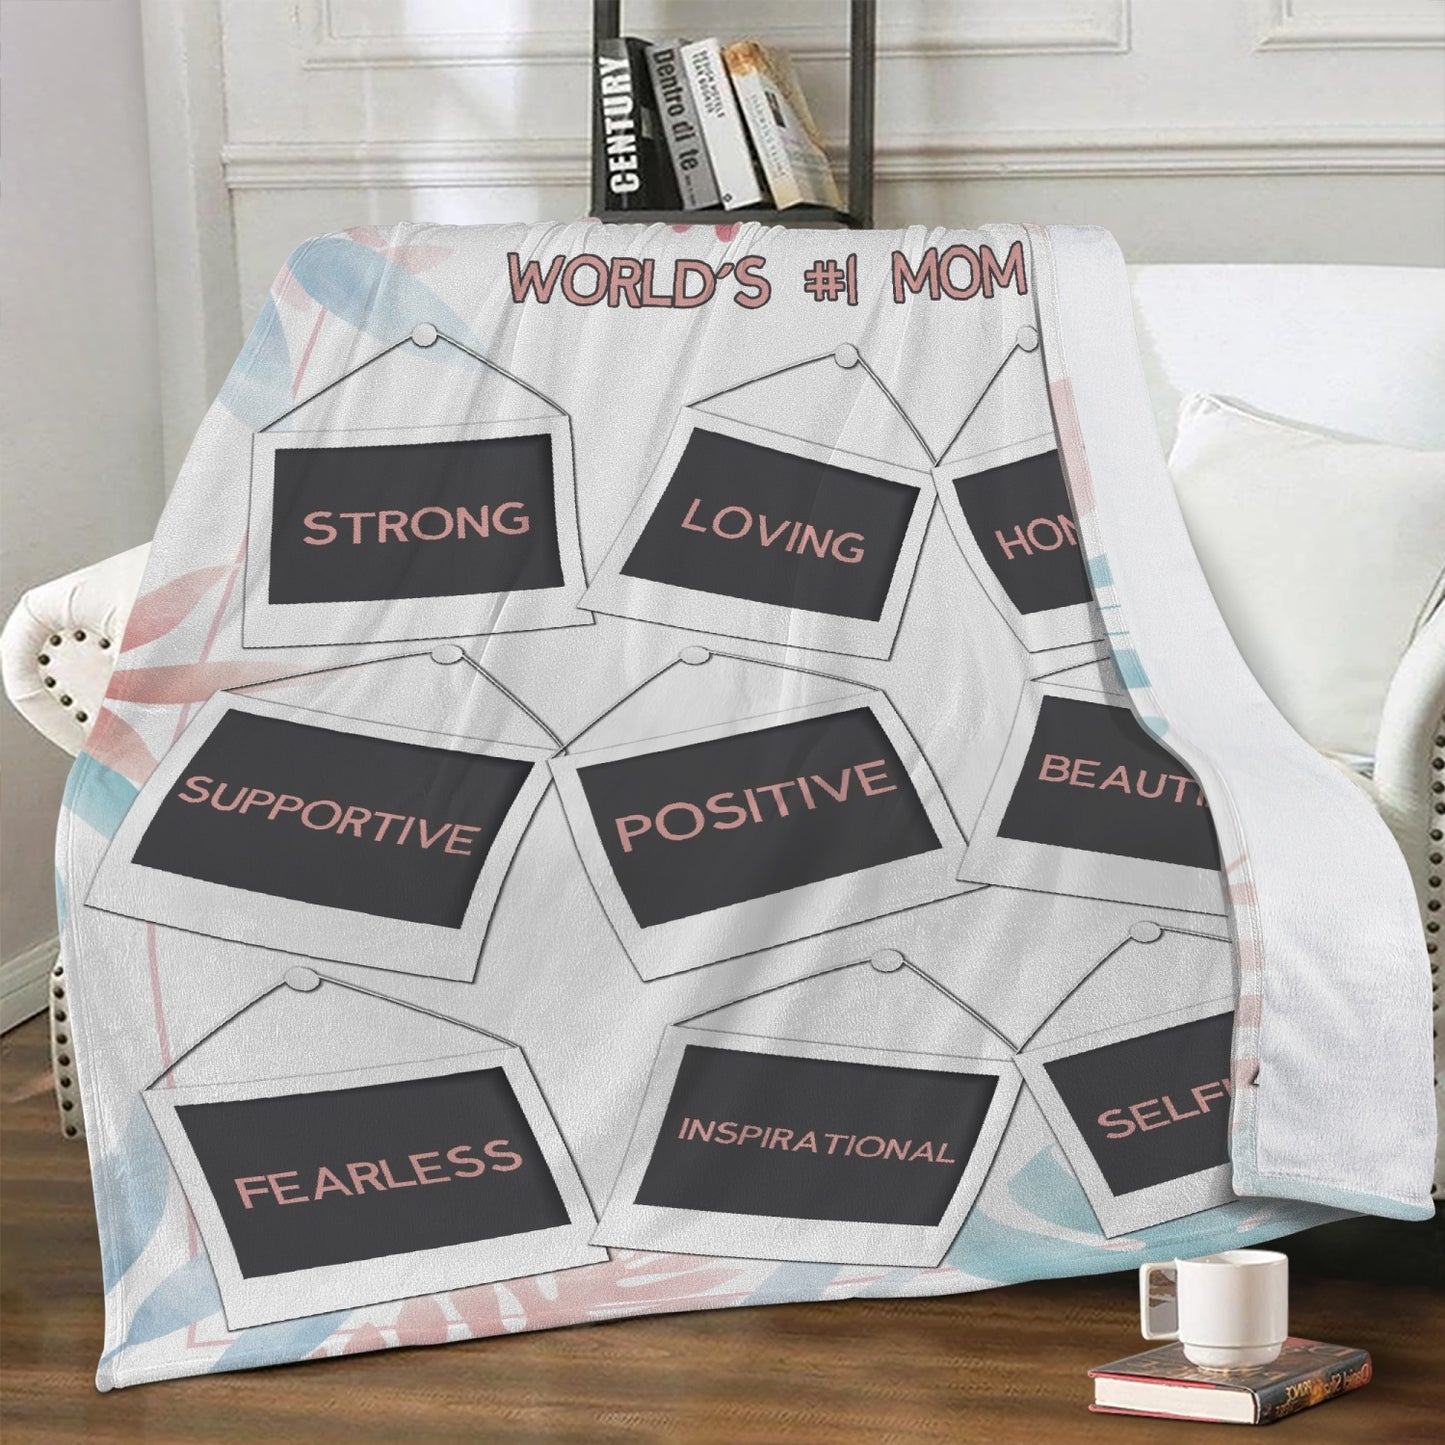 World's #1 Mom Dual-sided Stitched Fleece Blanket